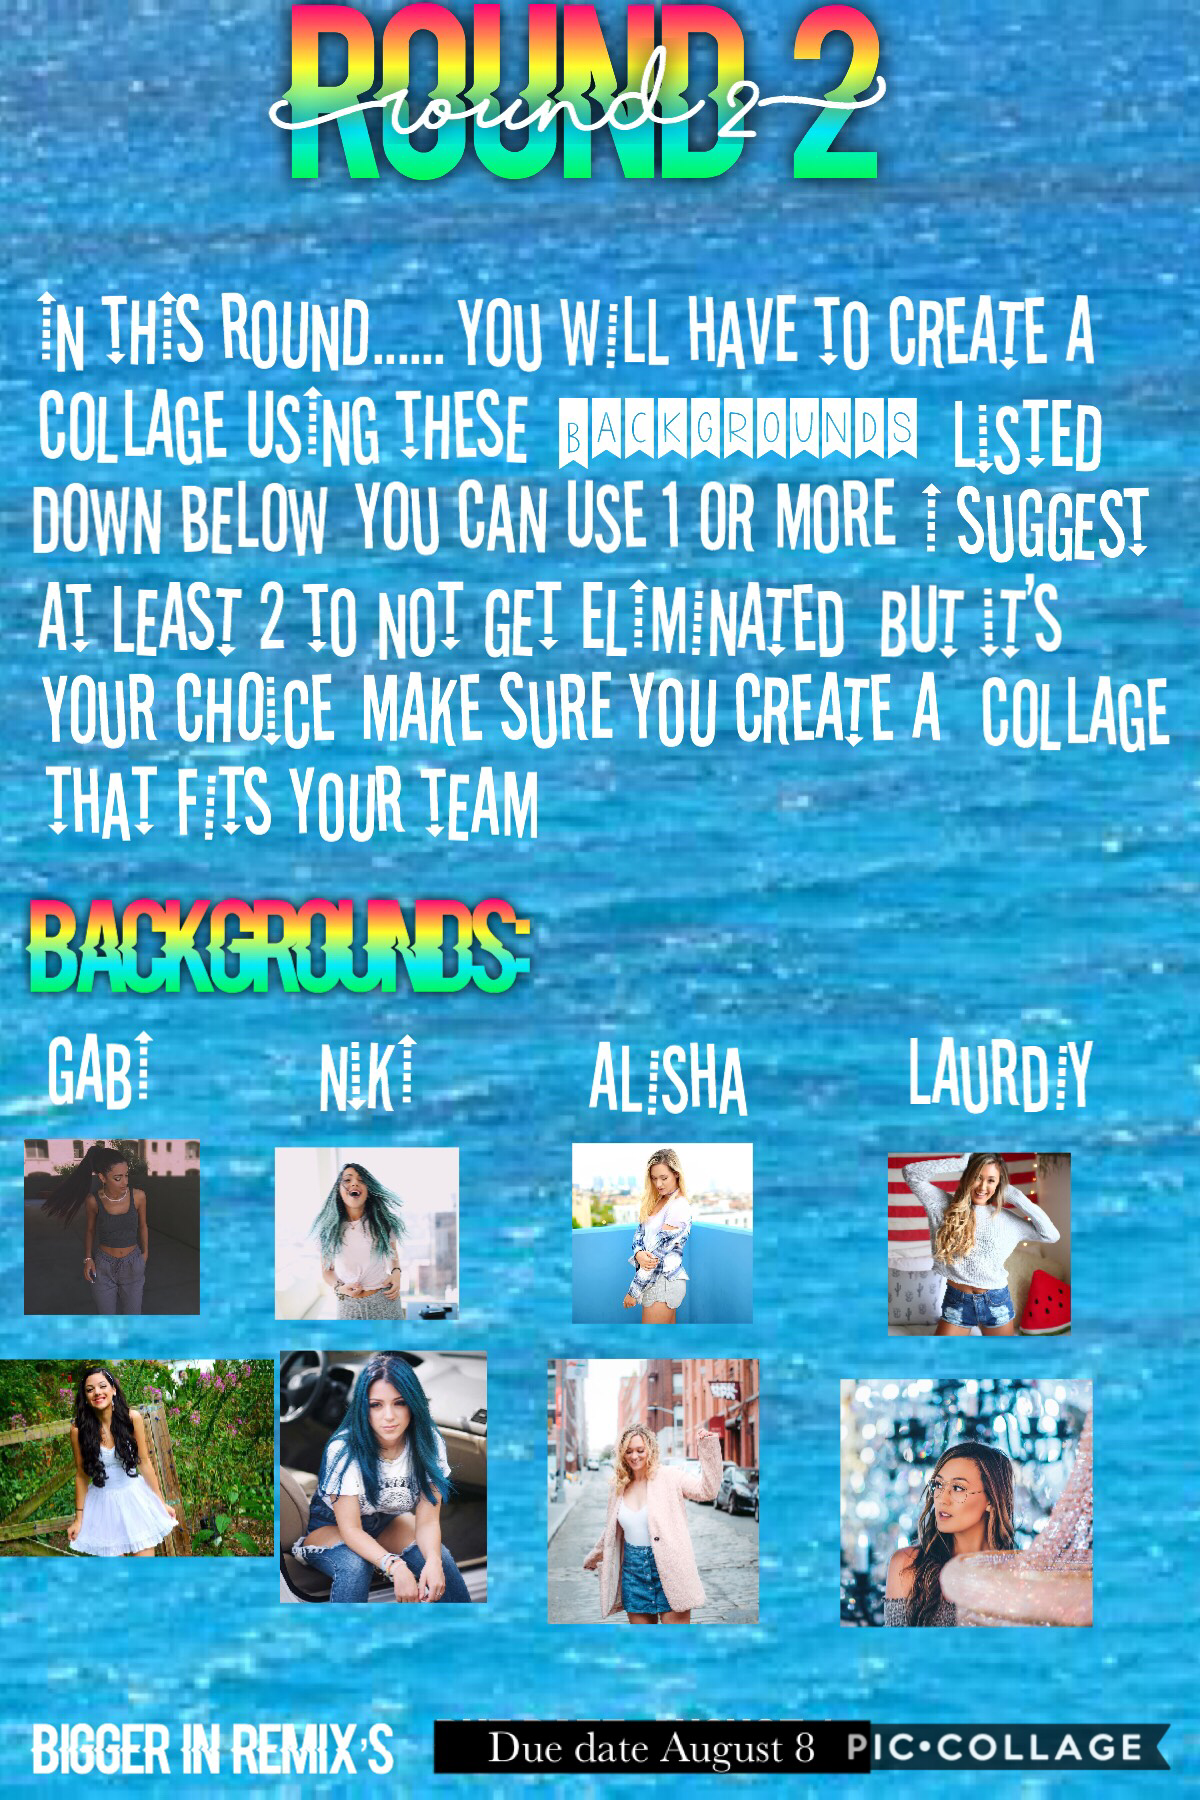 Round 2! Check your teams and enter by the due date! Photos bigger in remix’s! Good luck! 👍🏻